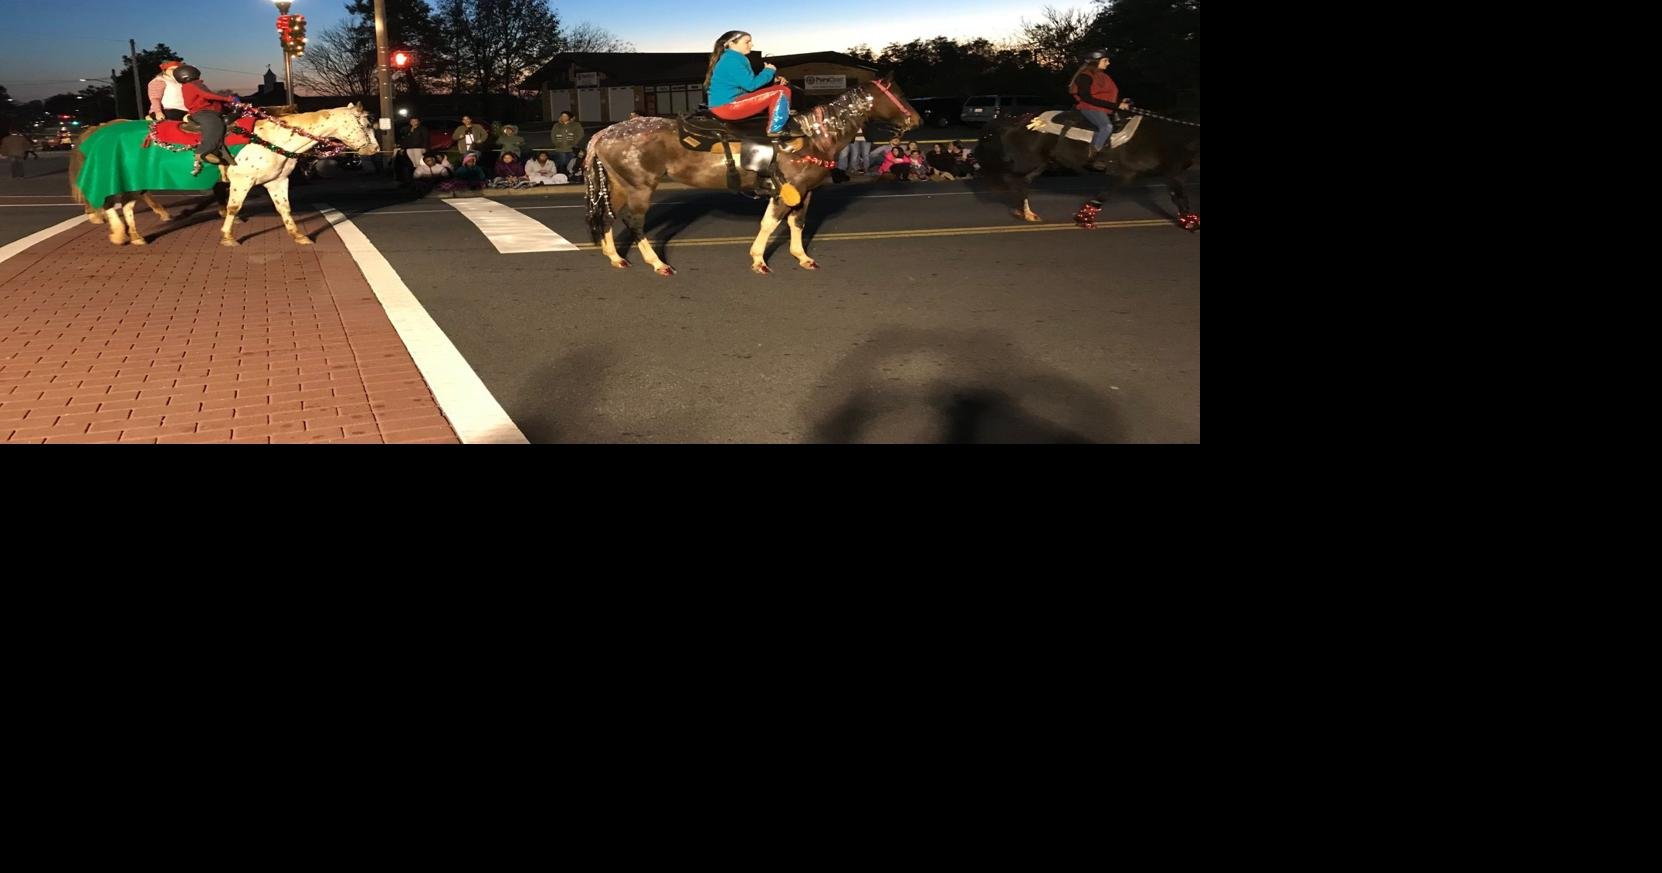 MartinsvilleHenry County Christmas parade wows crowd Latest